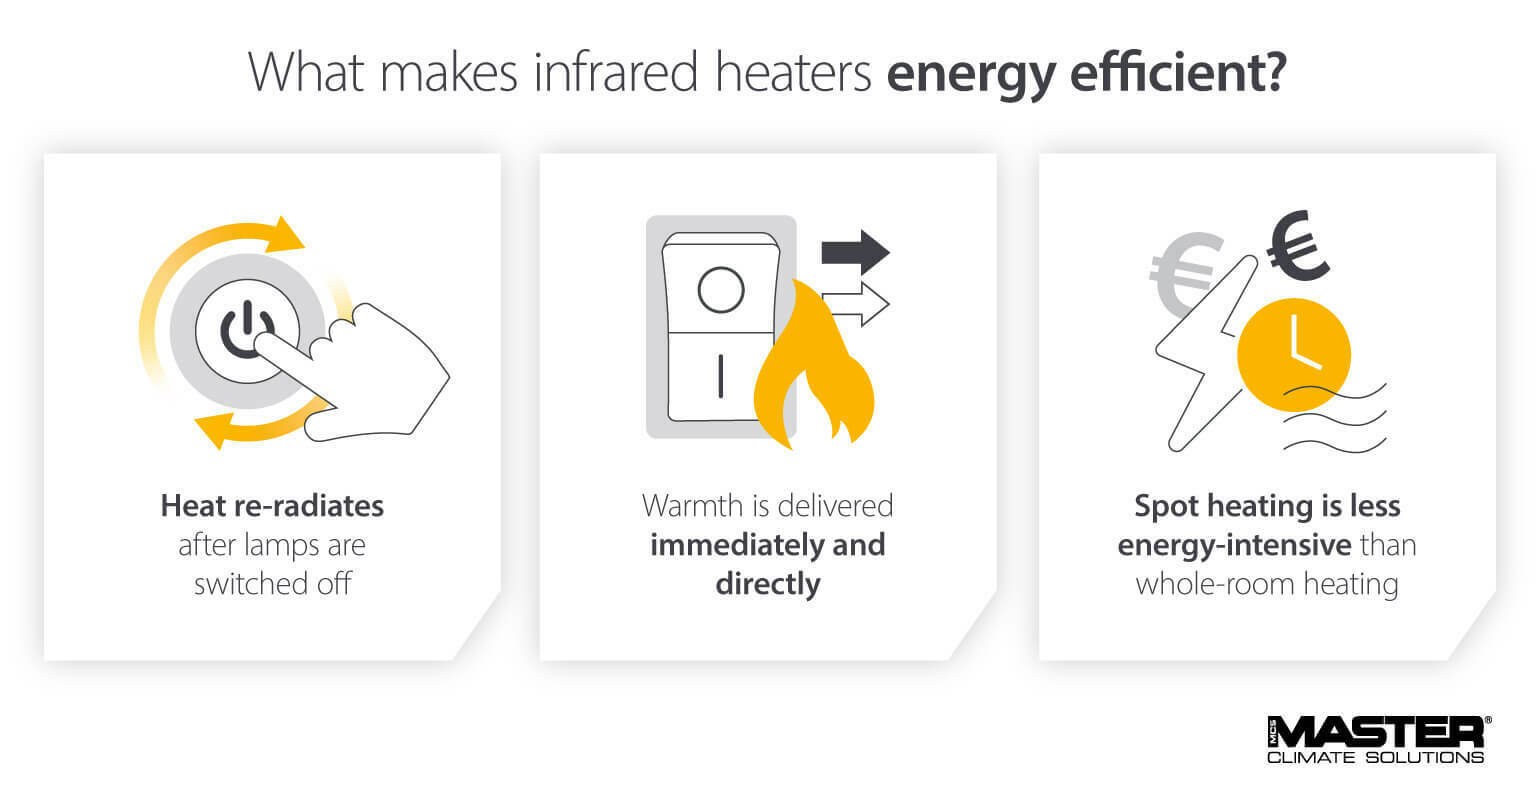 What makes infrared heaters energy efficient - Infographic Image